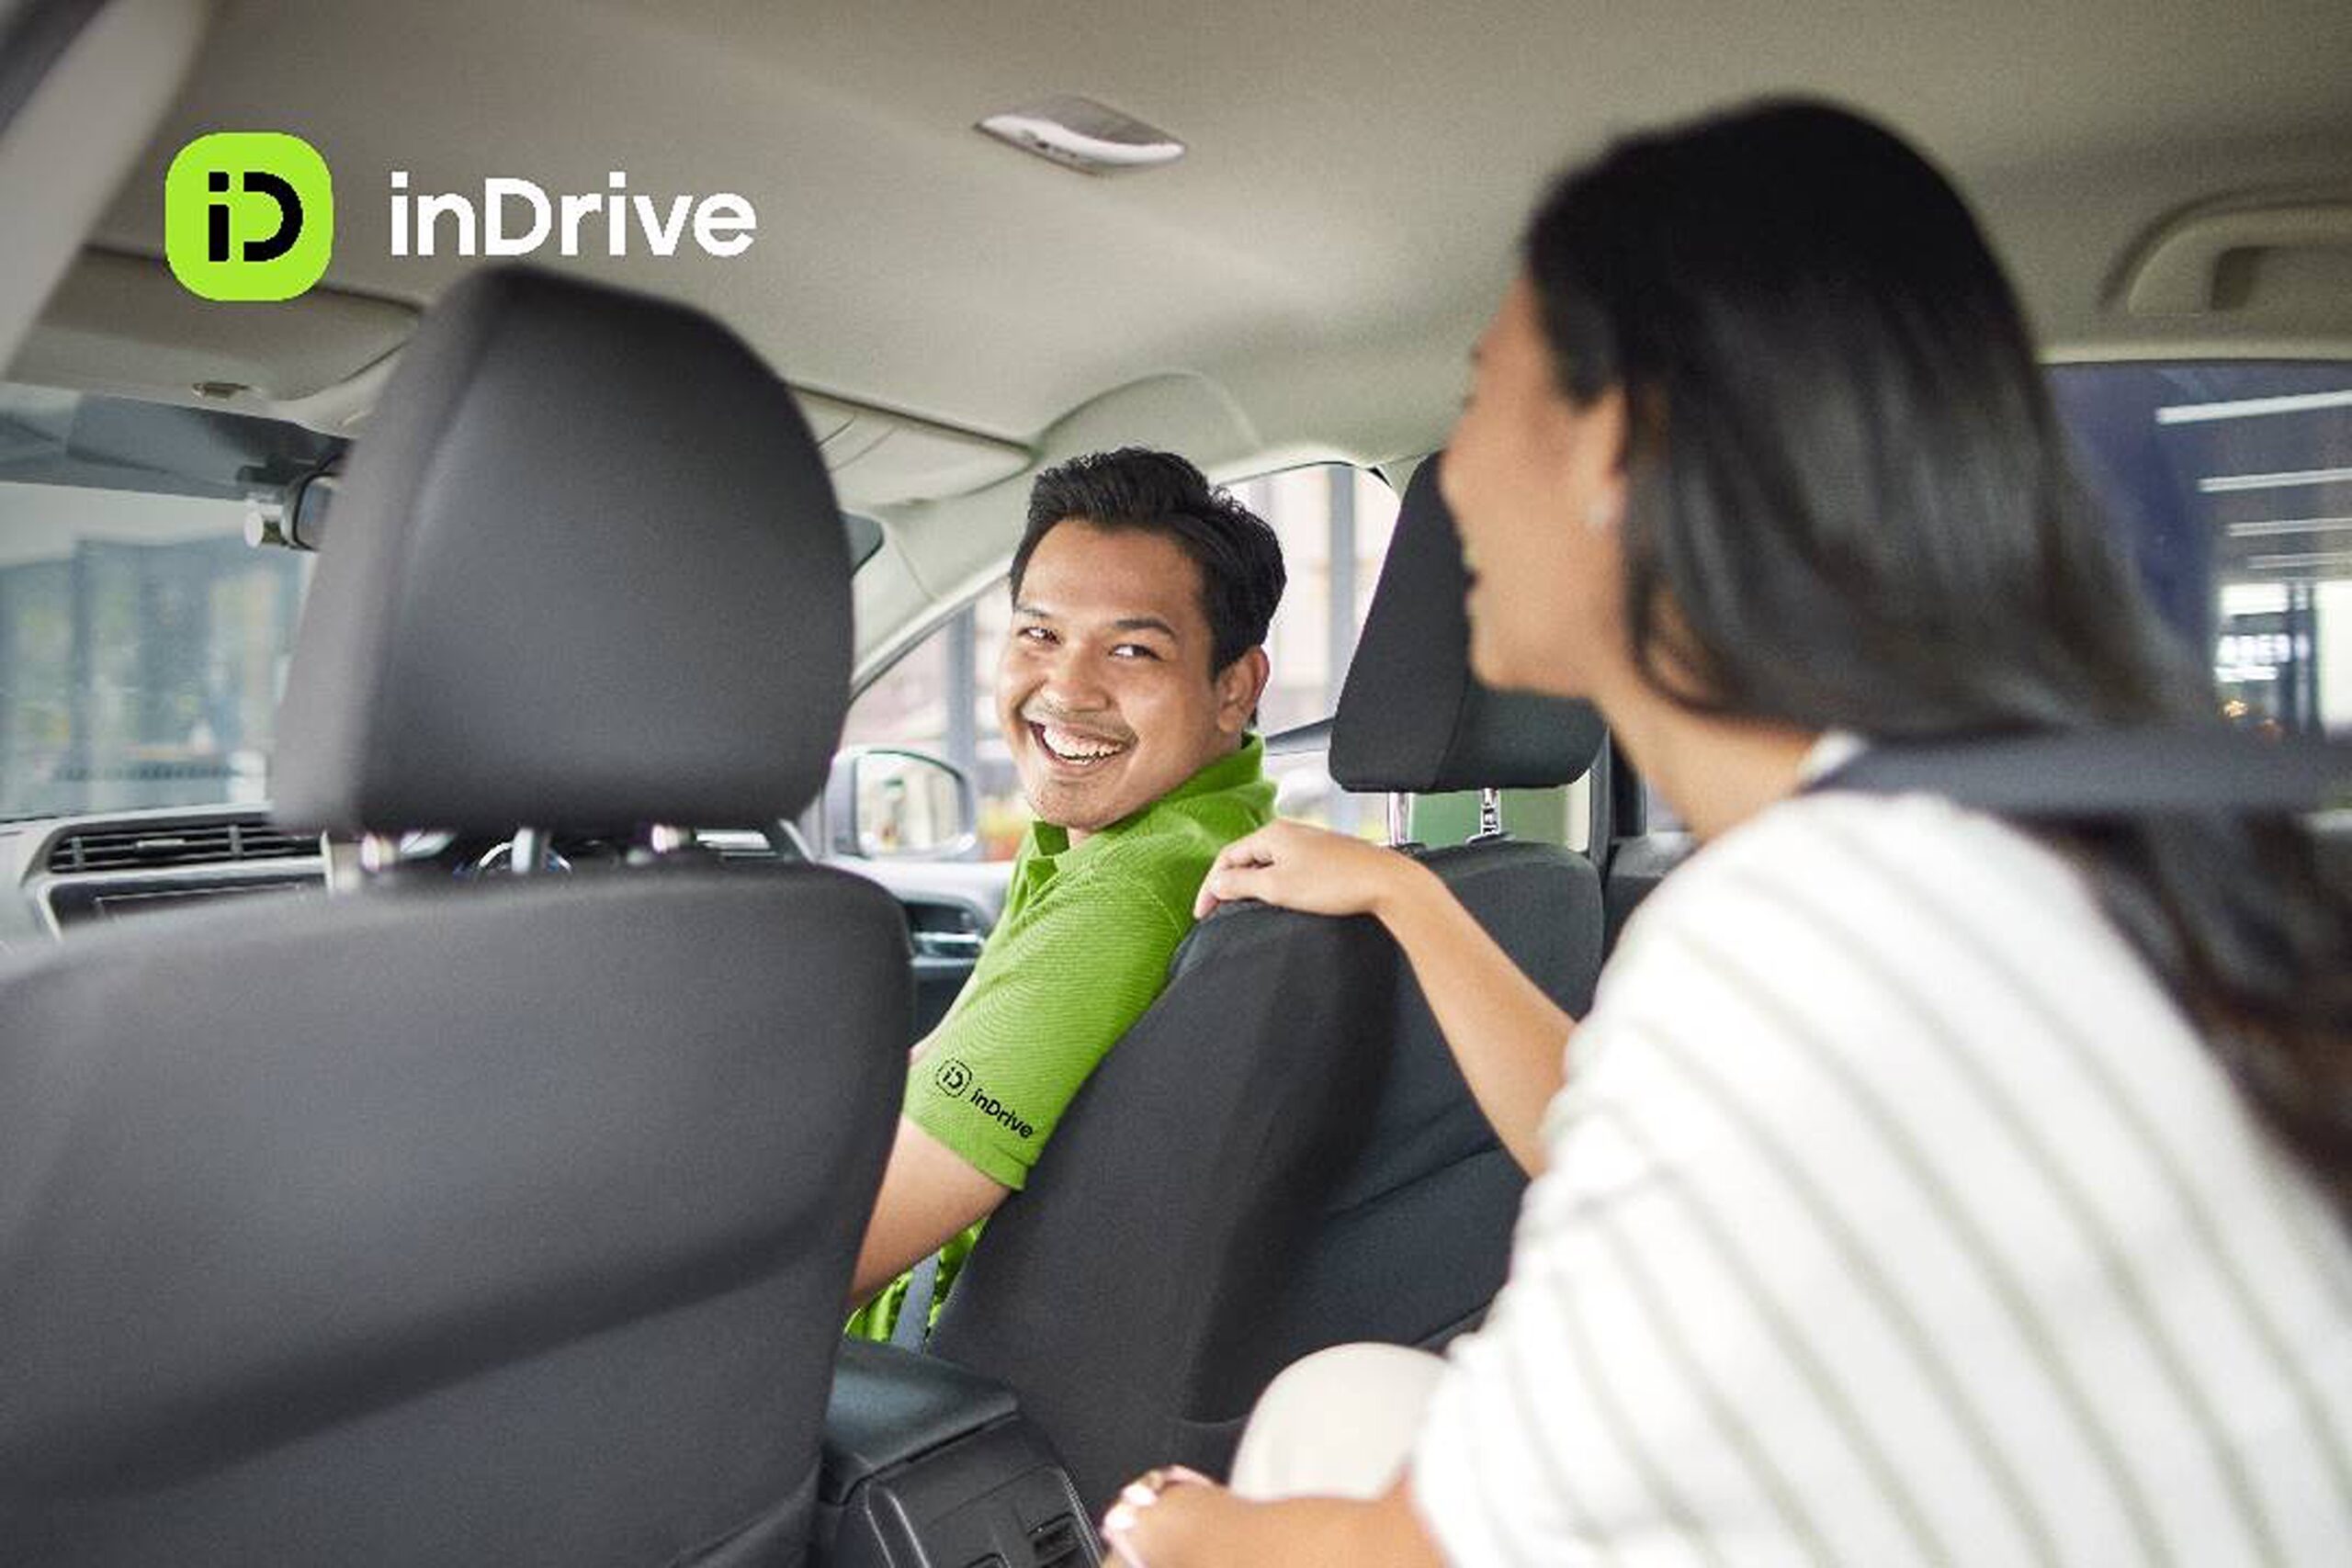 Grab’s new competitor? inDrive set to launch in the Philippines